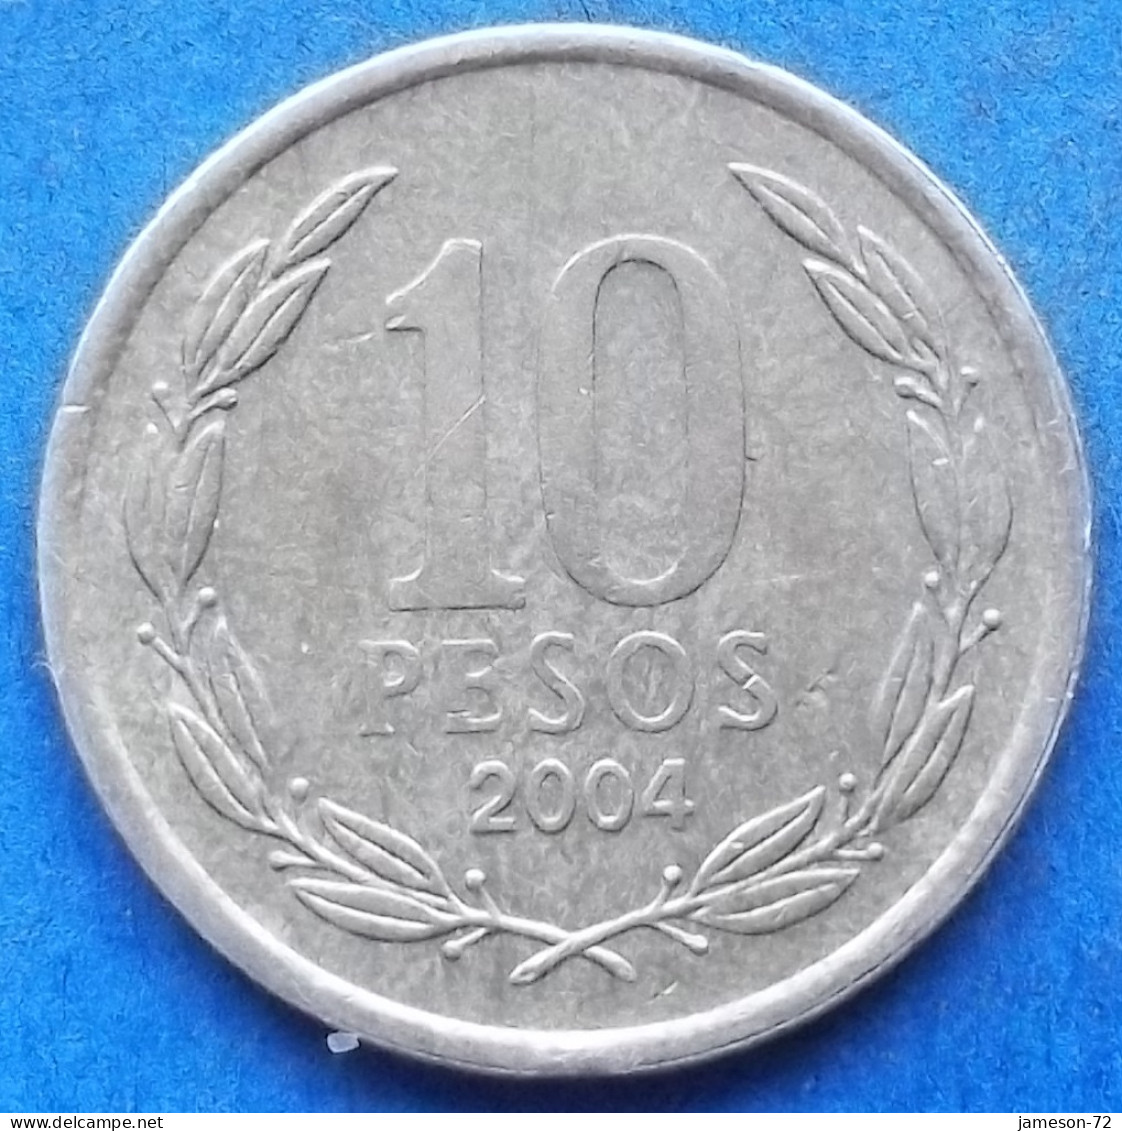 CHILE - 10 Pesos 2004 So KM# 228.2 Monetary Reform (1975) - Edelweiss Coins - Chile